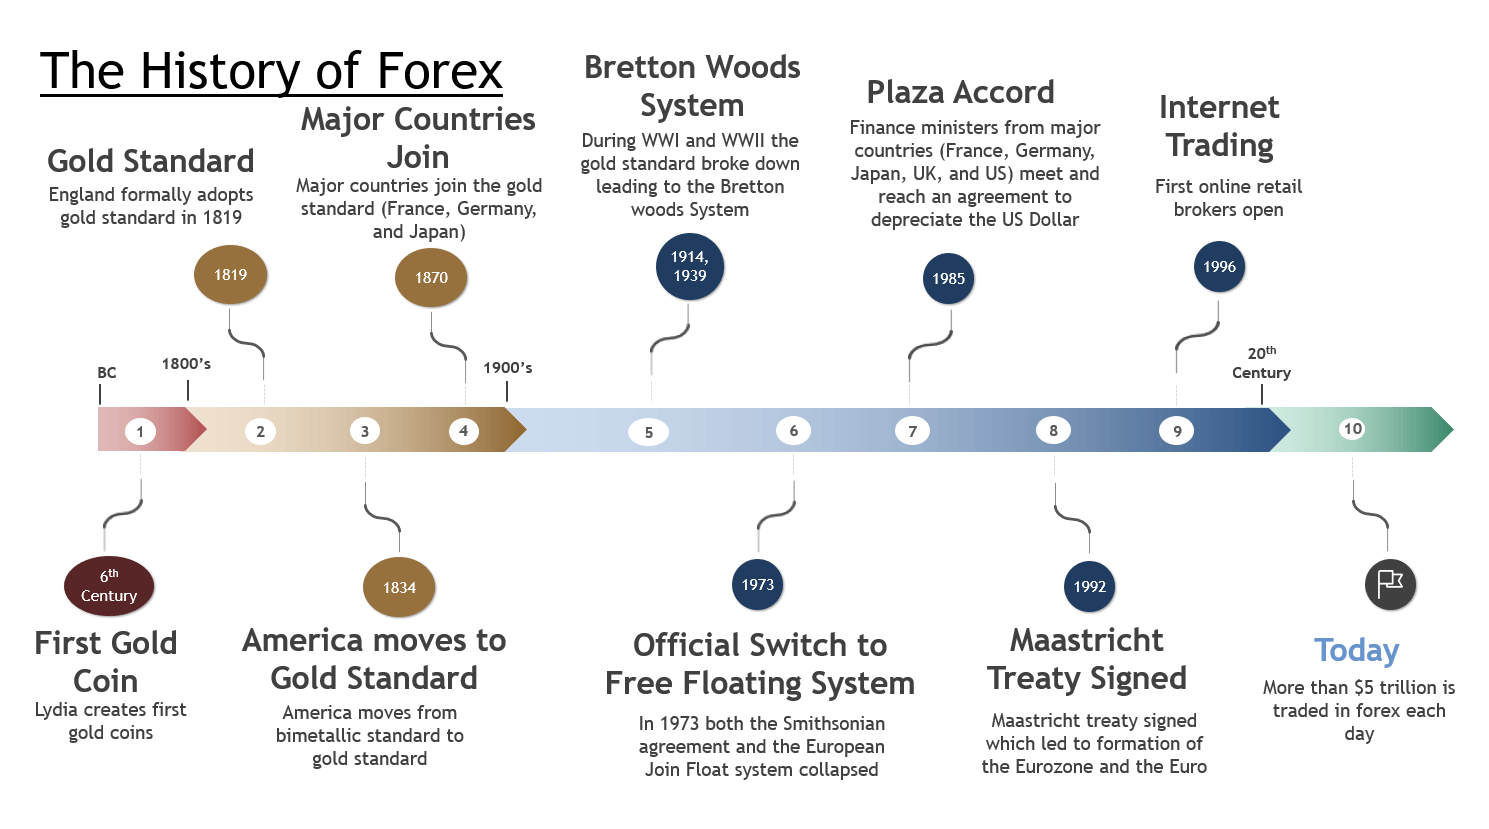 Forex history